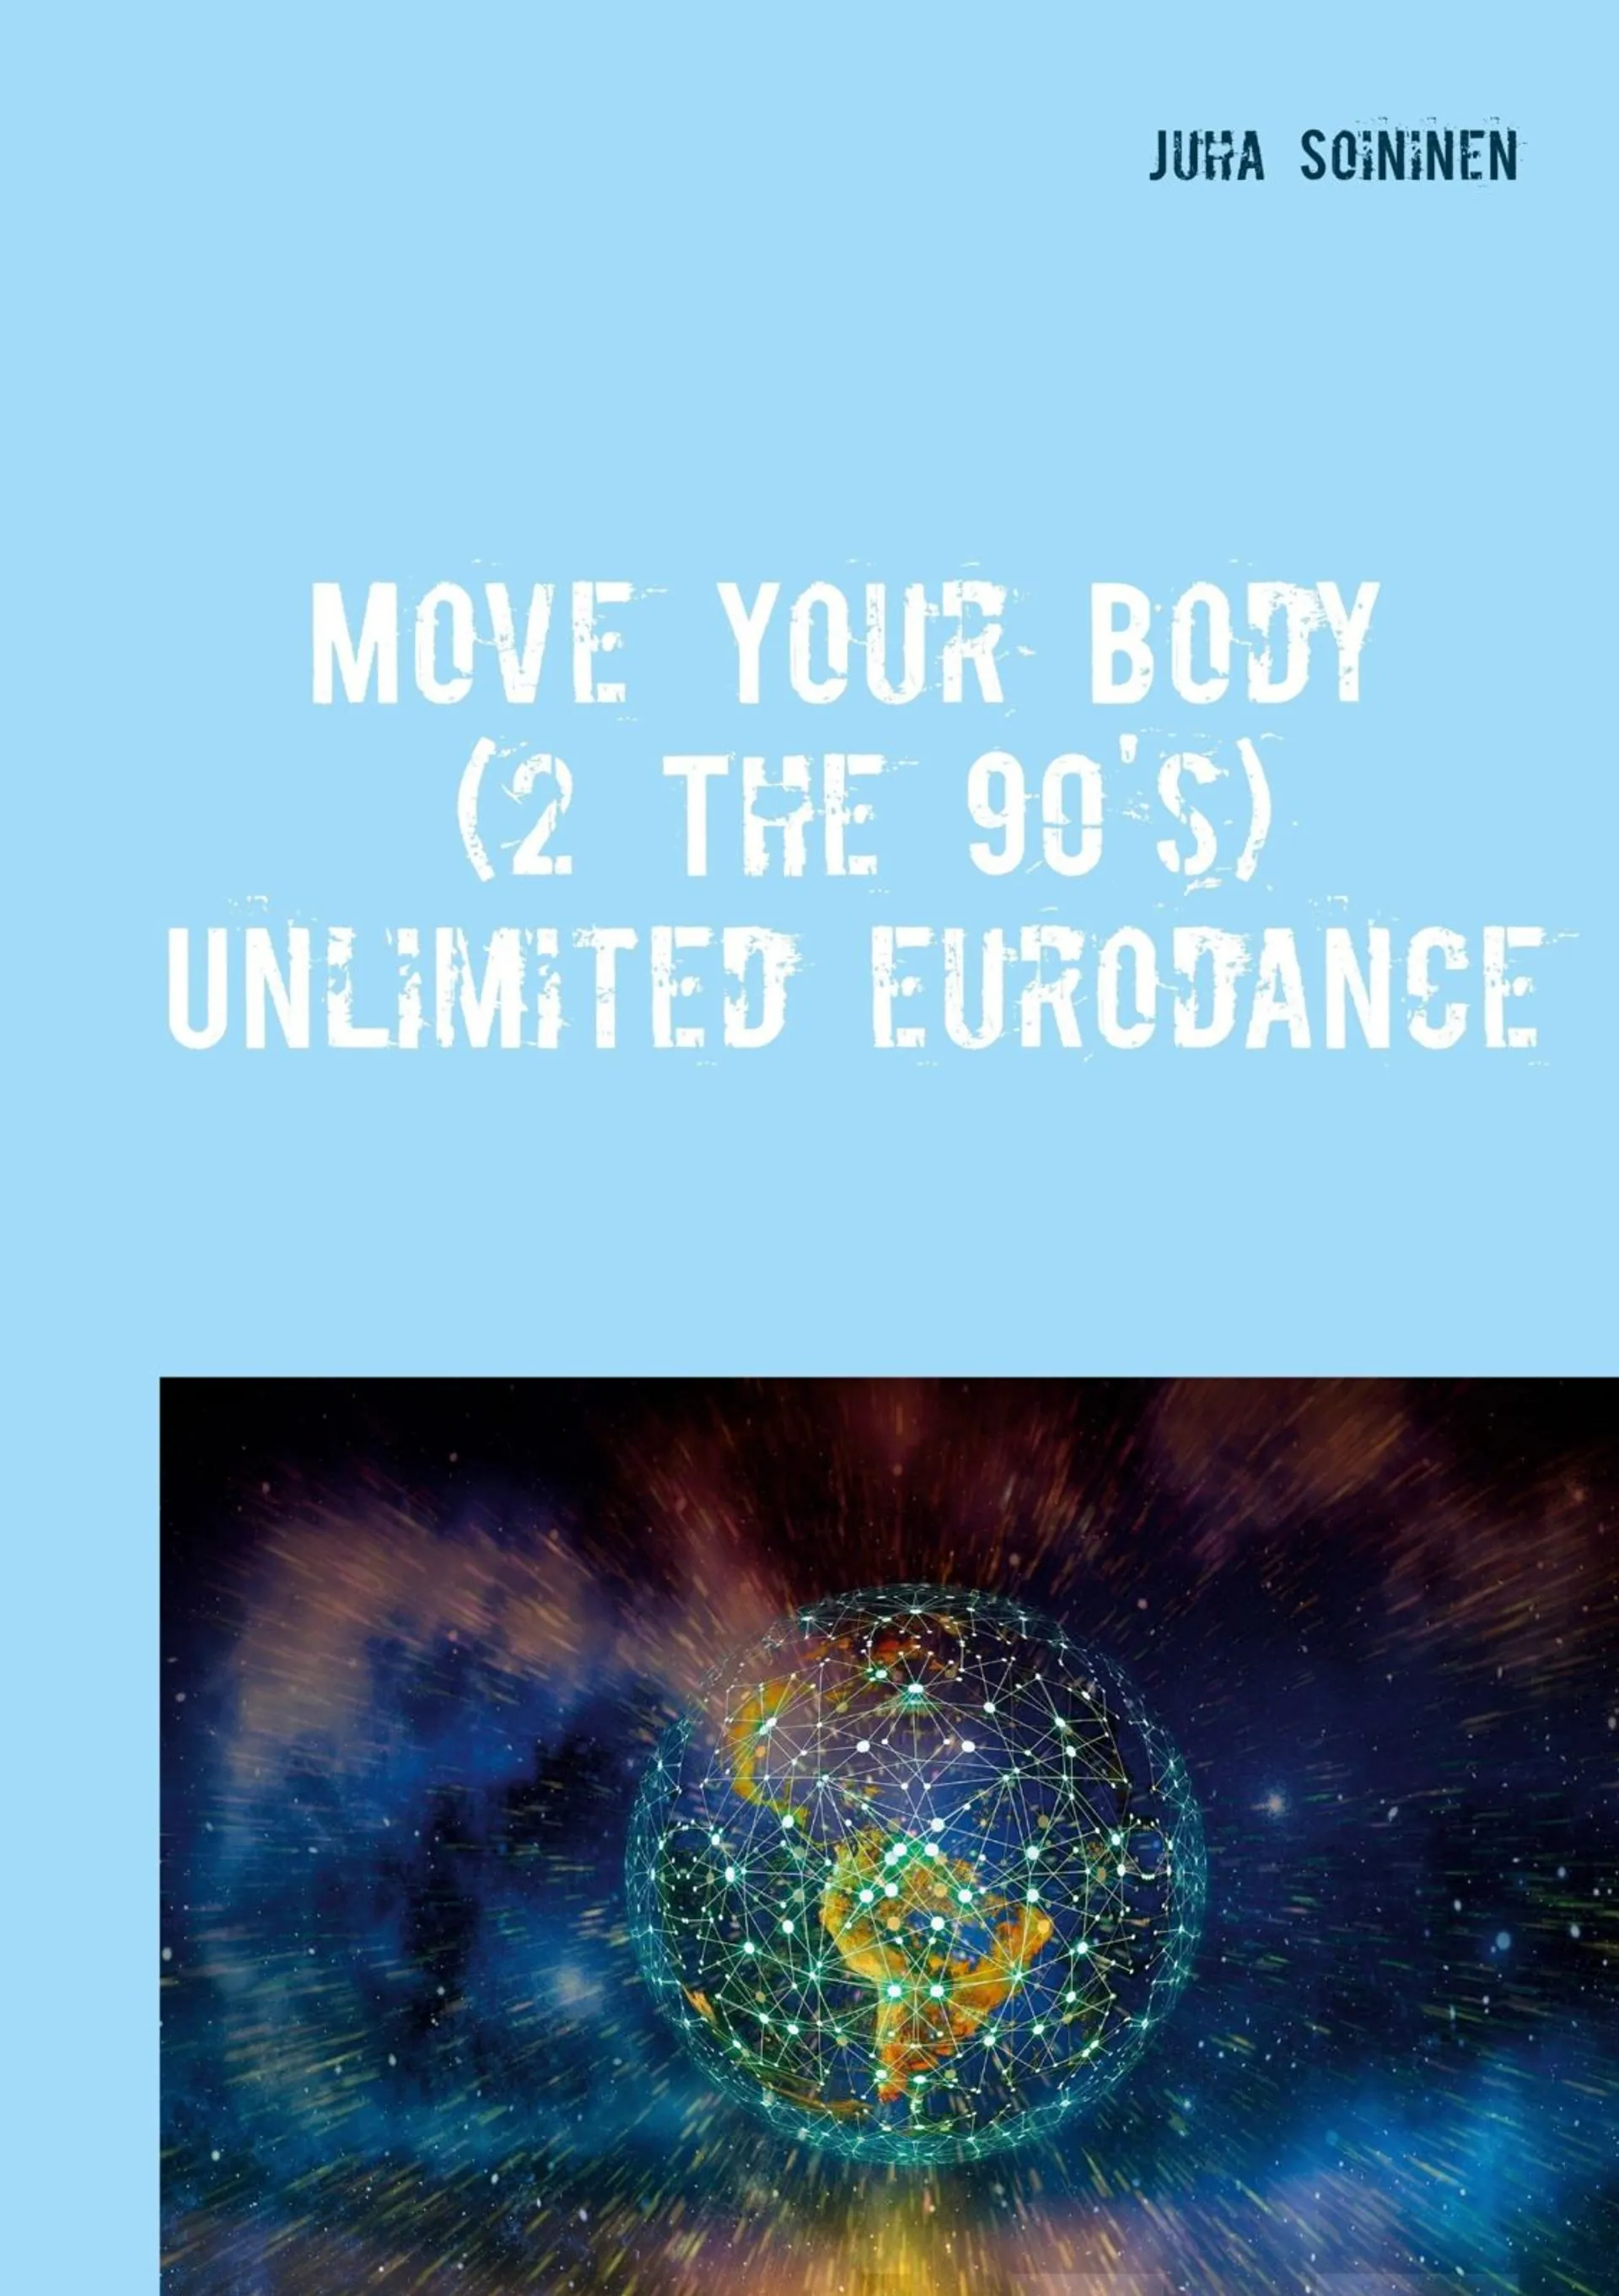 Soininen, Move Your Body (2 The 90's) - Unlimited Eurodance